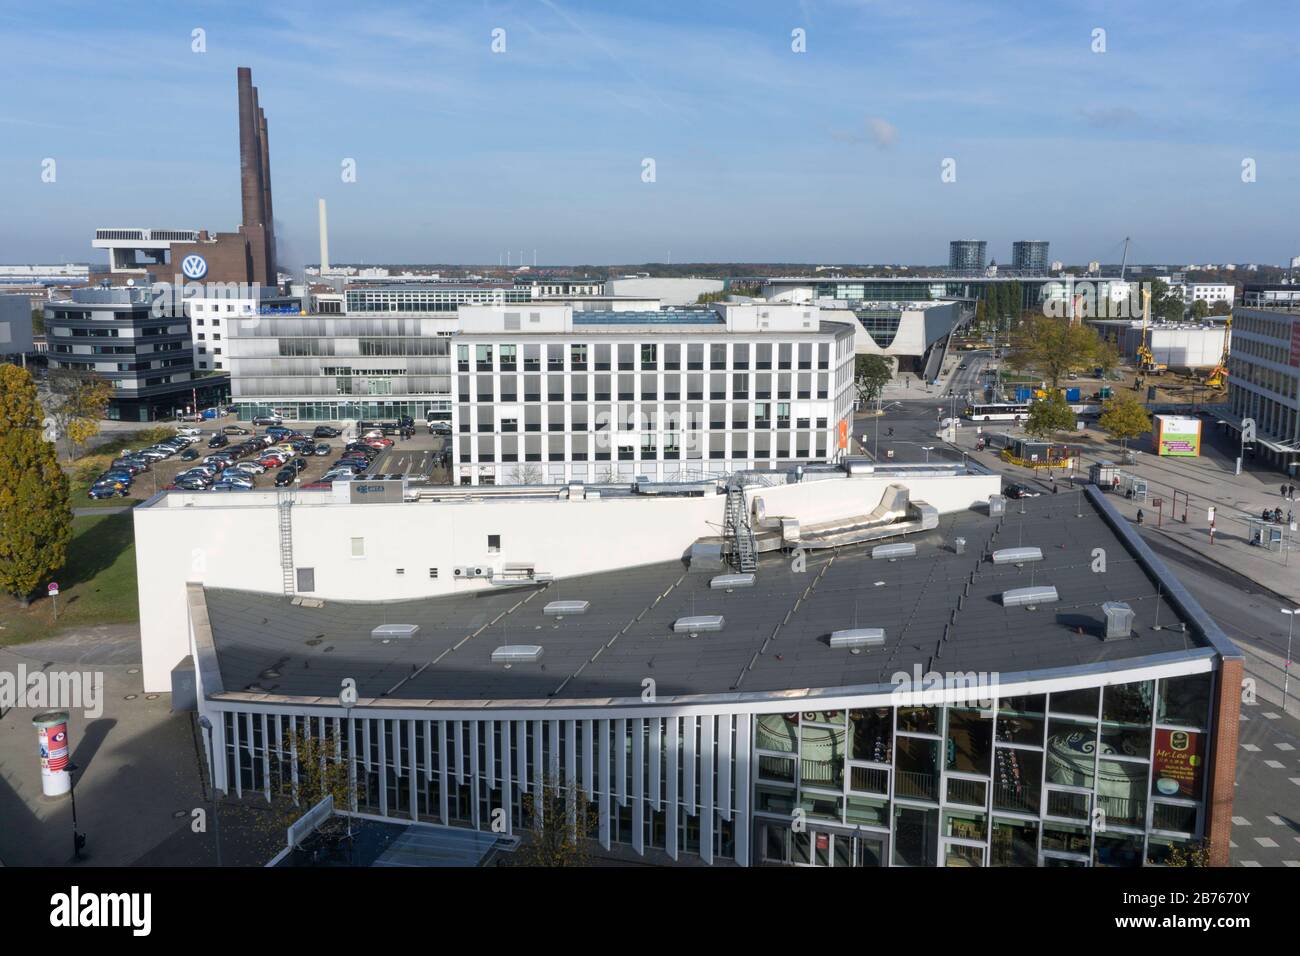 View of the city of Wolfsburg, in the background the VW plant and the car towers The city of Wolfsburg is reacting to the expanding exhaust gas crisis at Volkswagen. The city decreed a budget freeze and a hiring freeze. Volkswagen is the largest employer in the city. [automated translation] Stock Photo